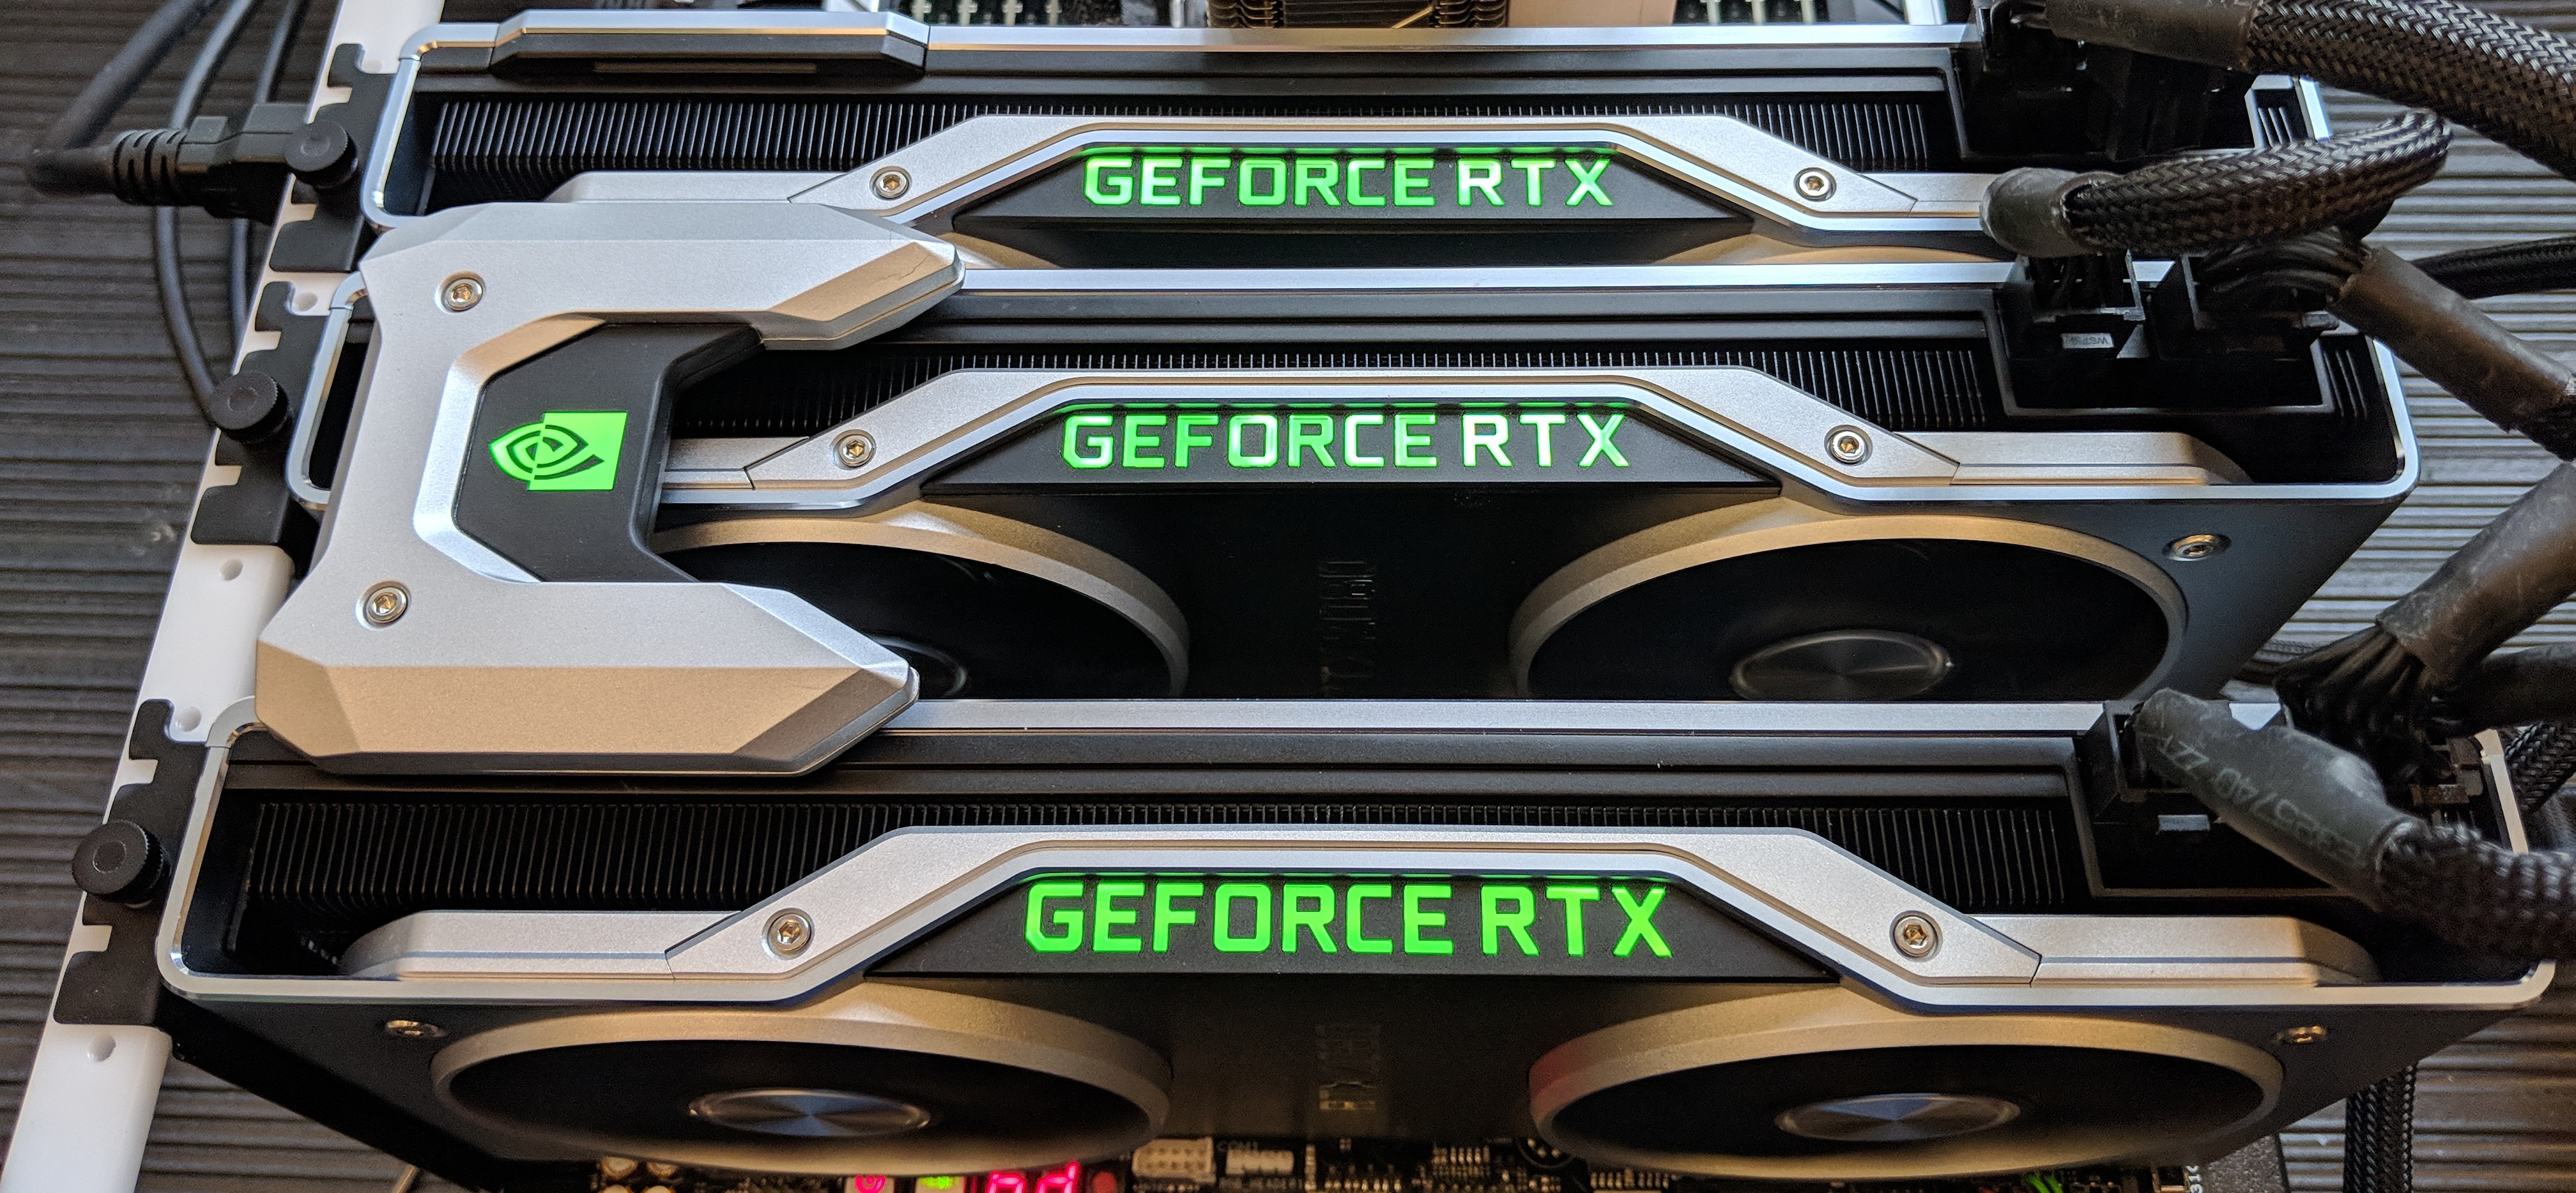 Dual NVIDIA GeForce RTX 2080 Cards with a GeForce RTX NVLink Bridge Installed